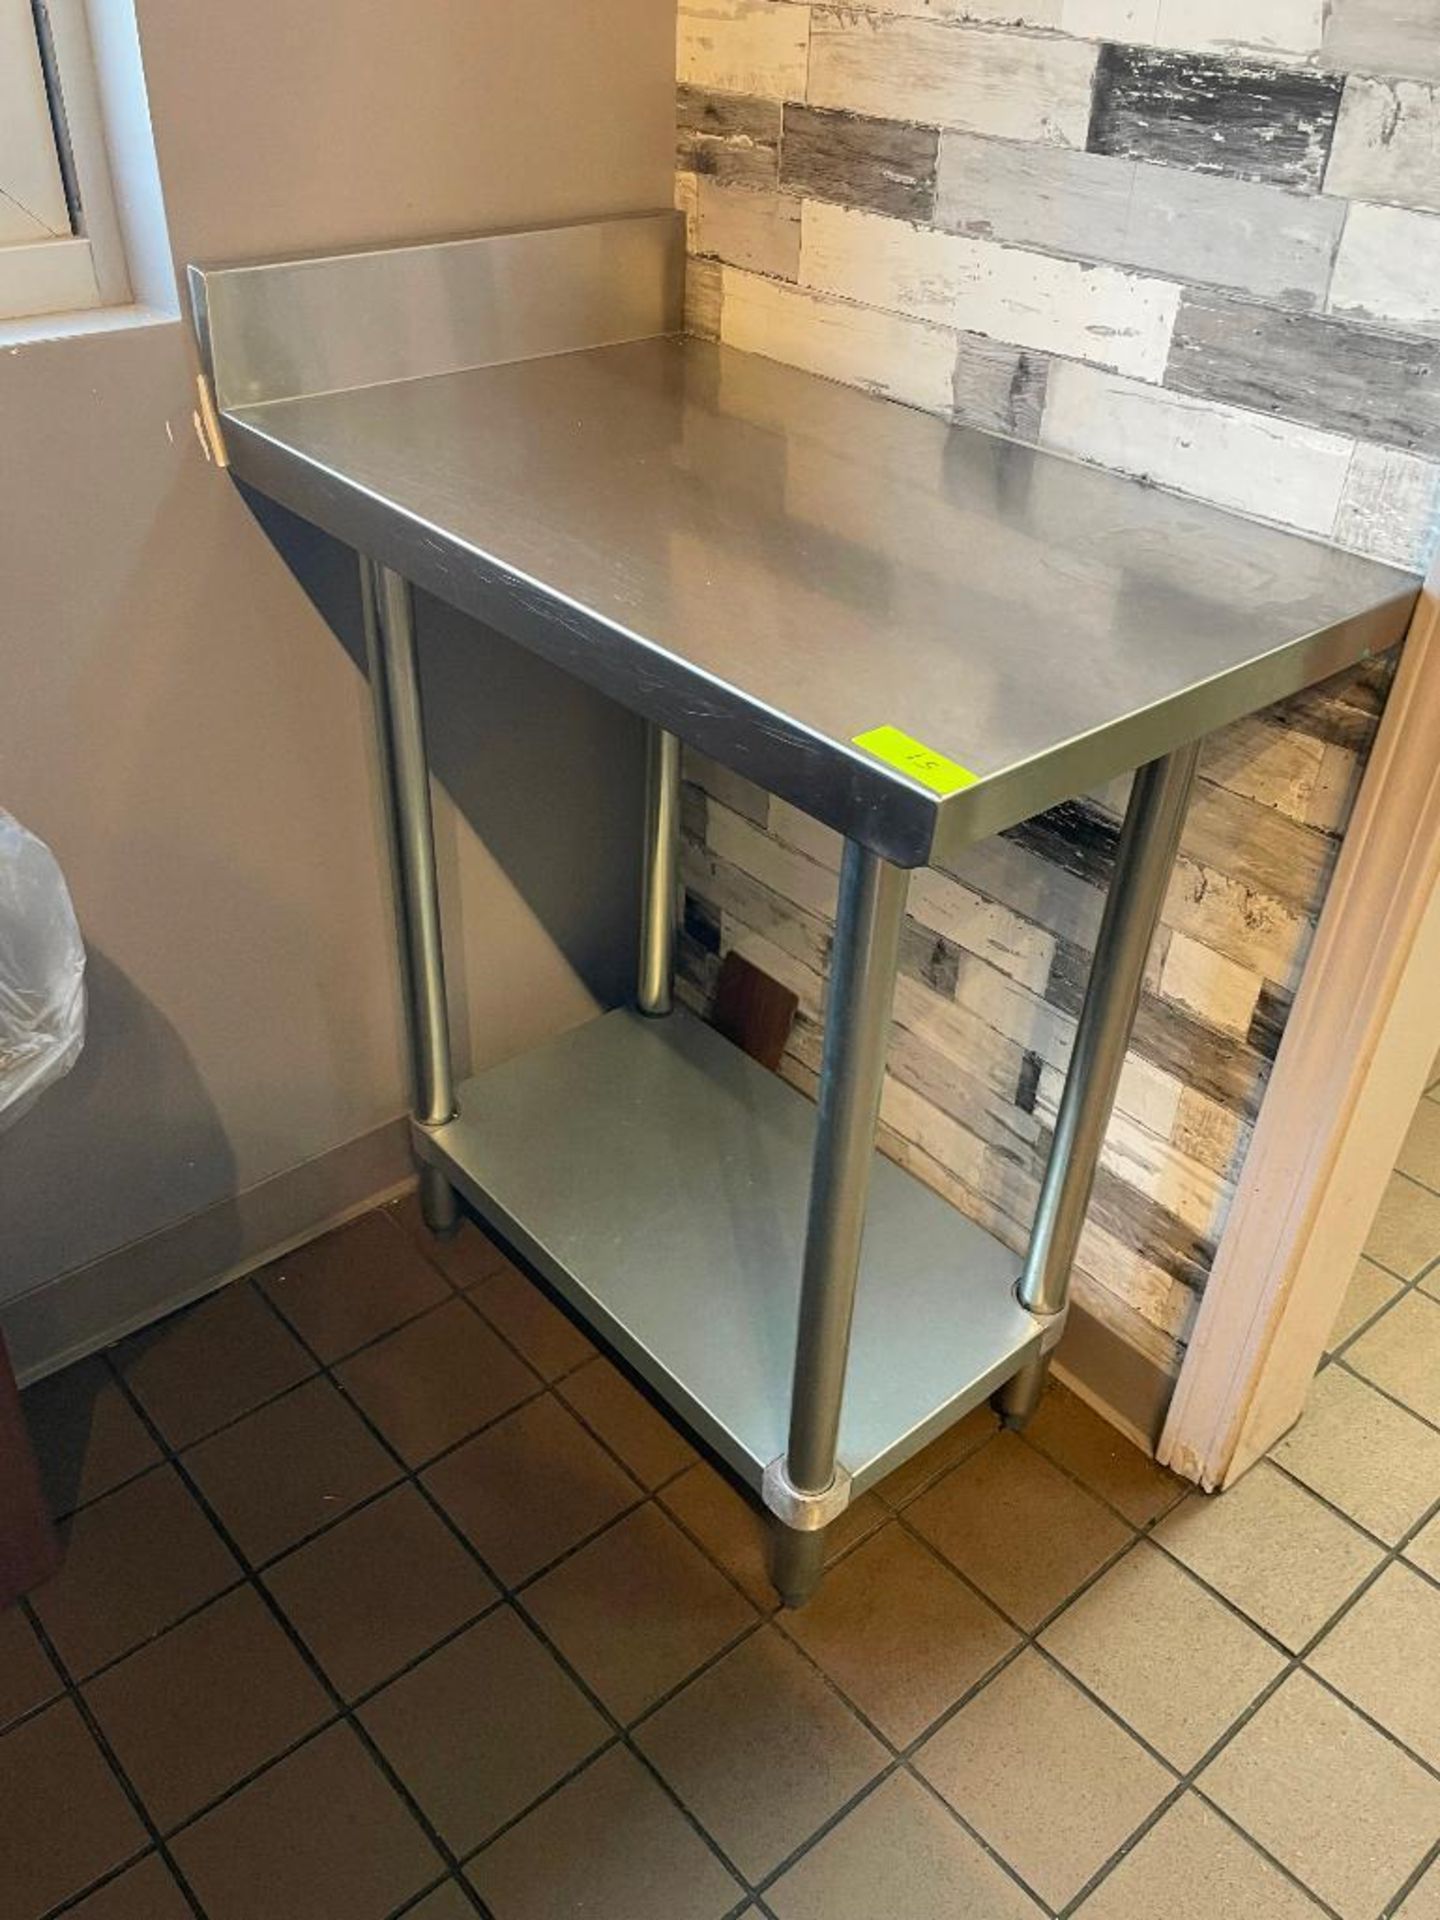 DESCRIPTION: 30" X 18" STAINLESS TABLE W/ 4" BACK SPLASH SIZE 30" X 18" LOCATION: COUNTER QTY: 1 - Image 2 of 4